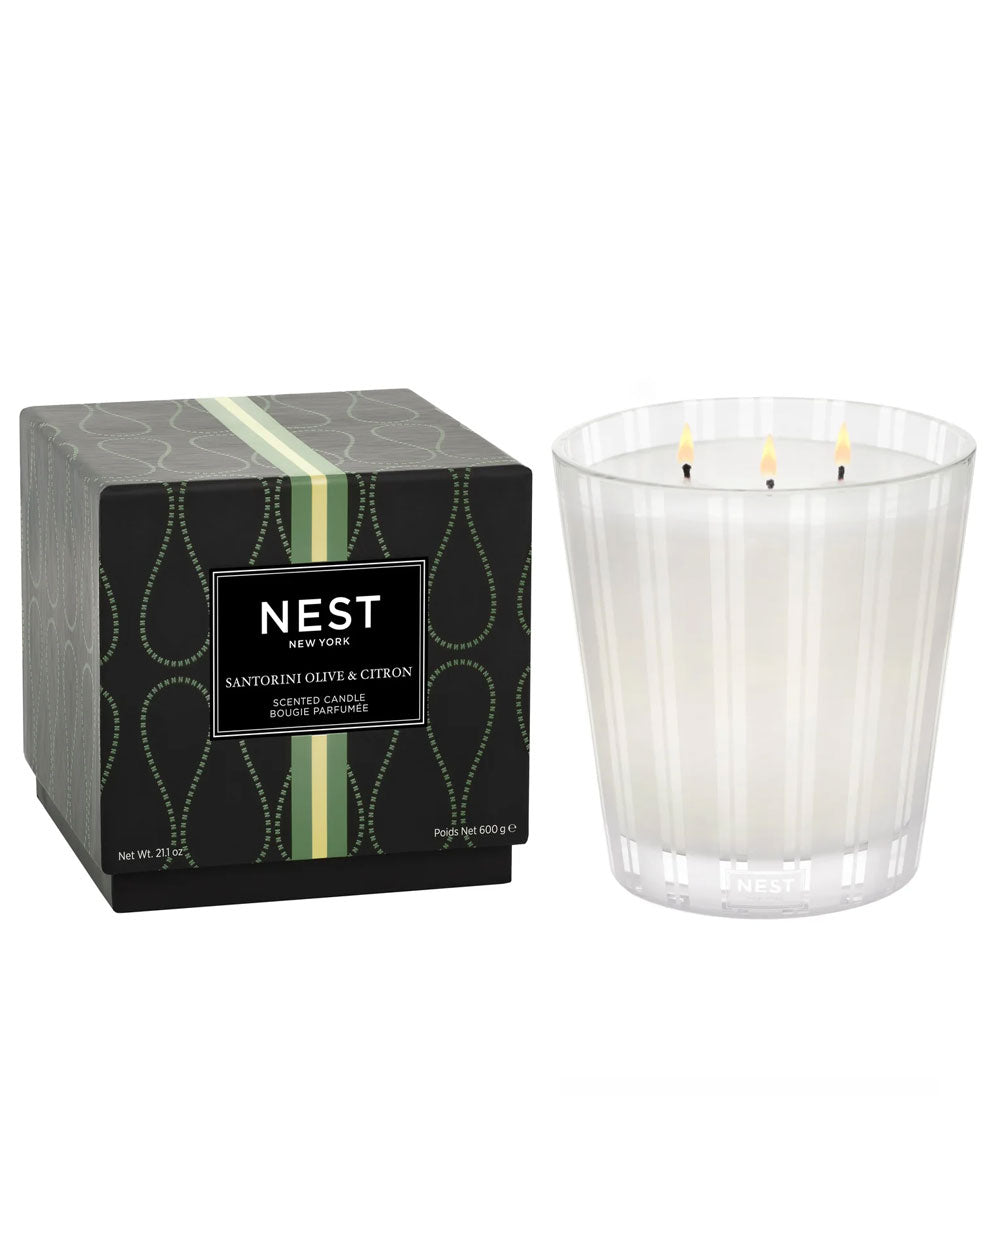 Santorini Olive and Citron 3-Wick Candle